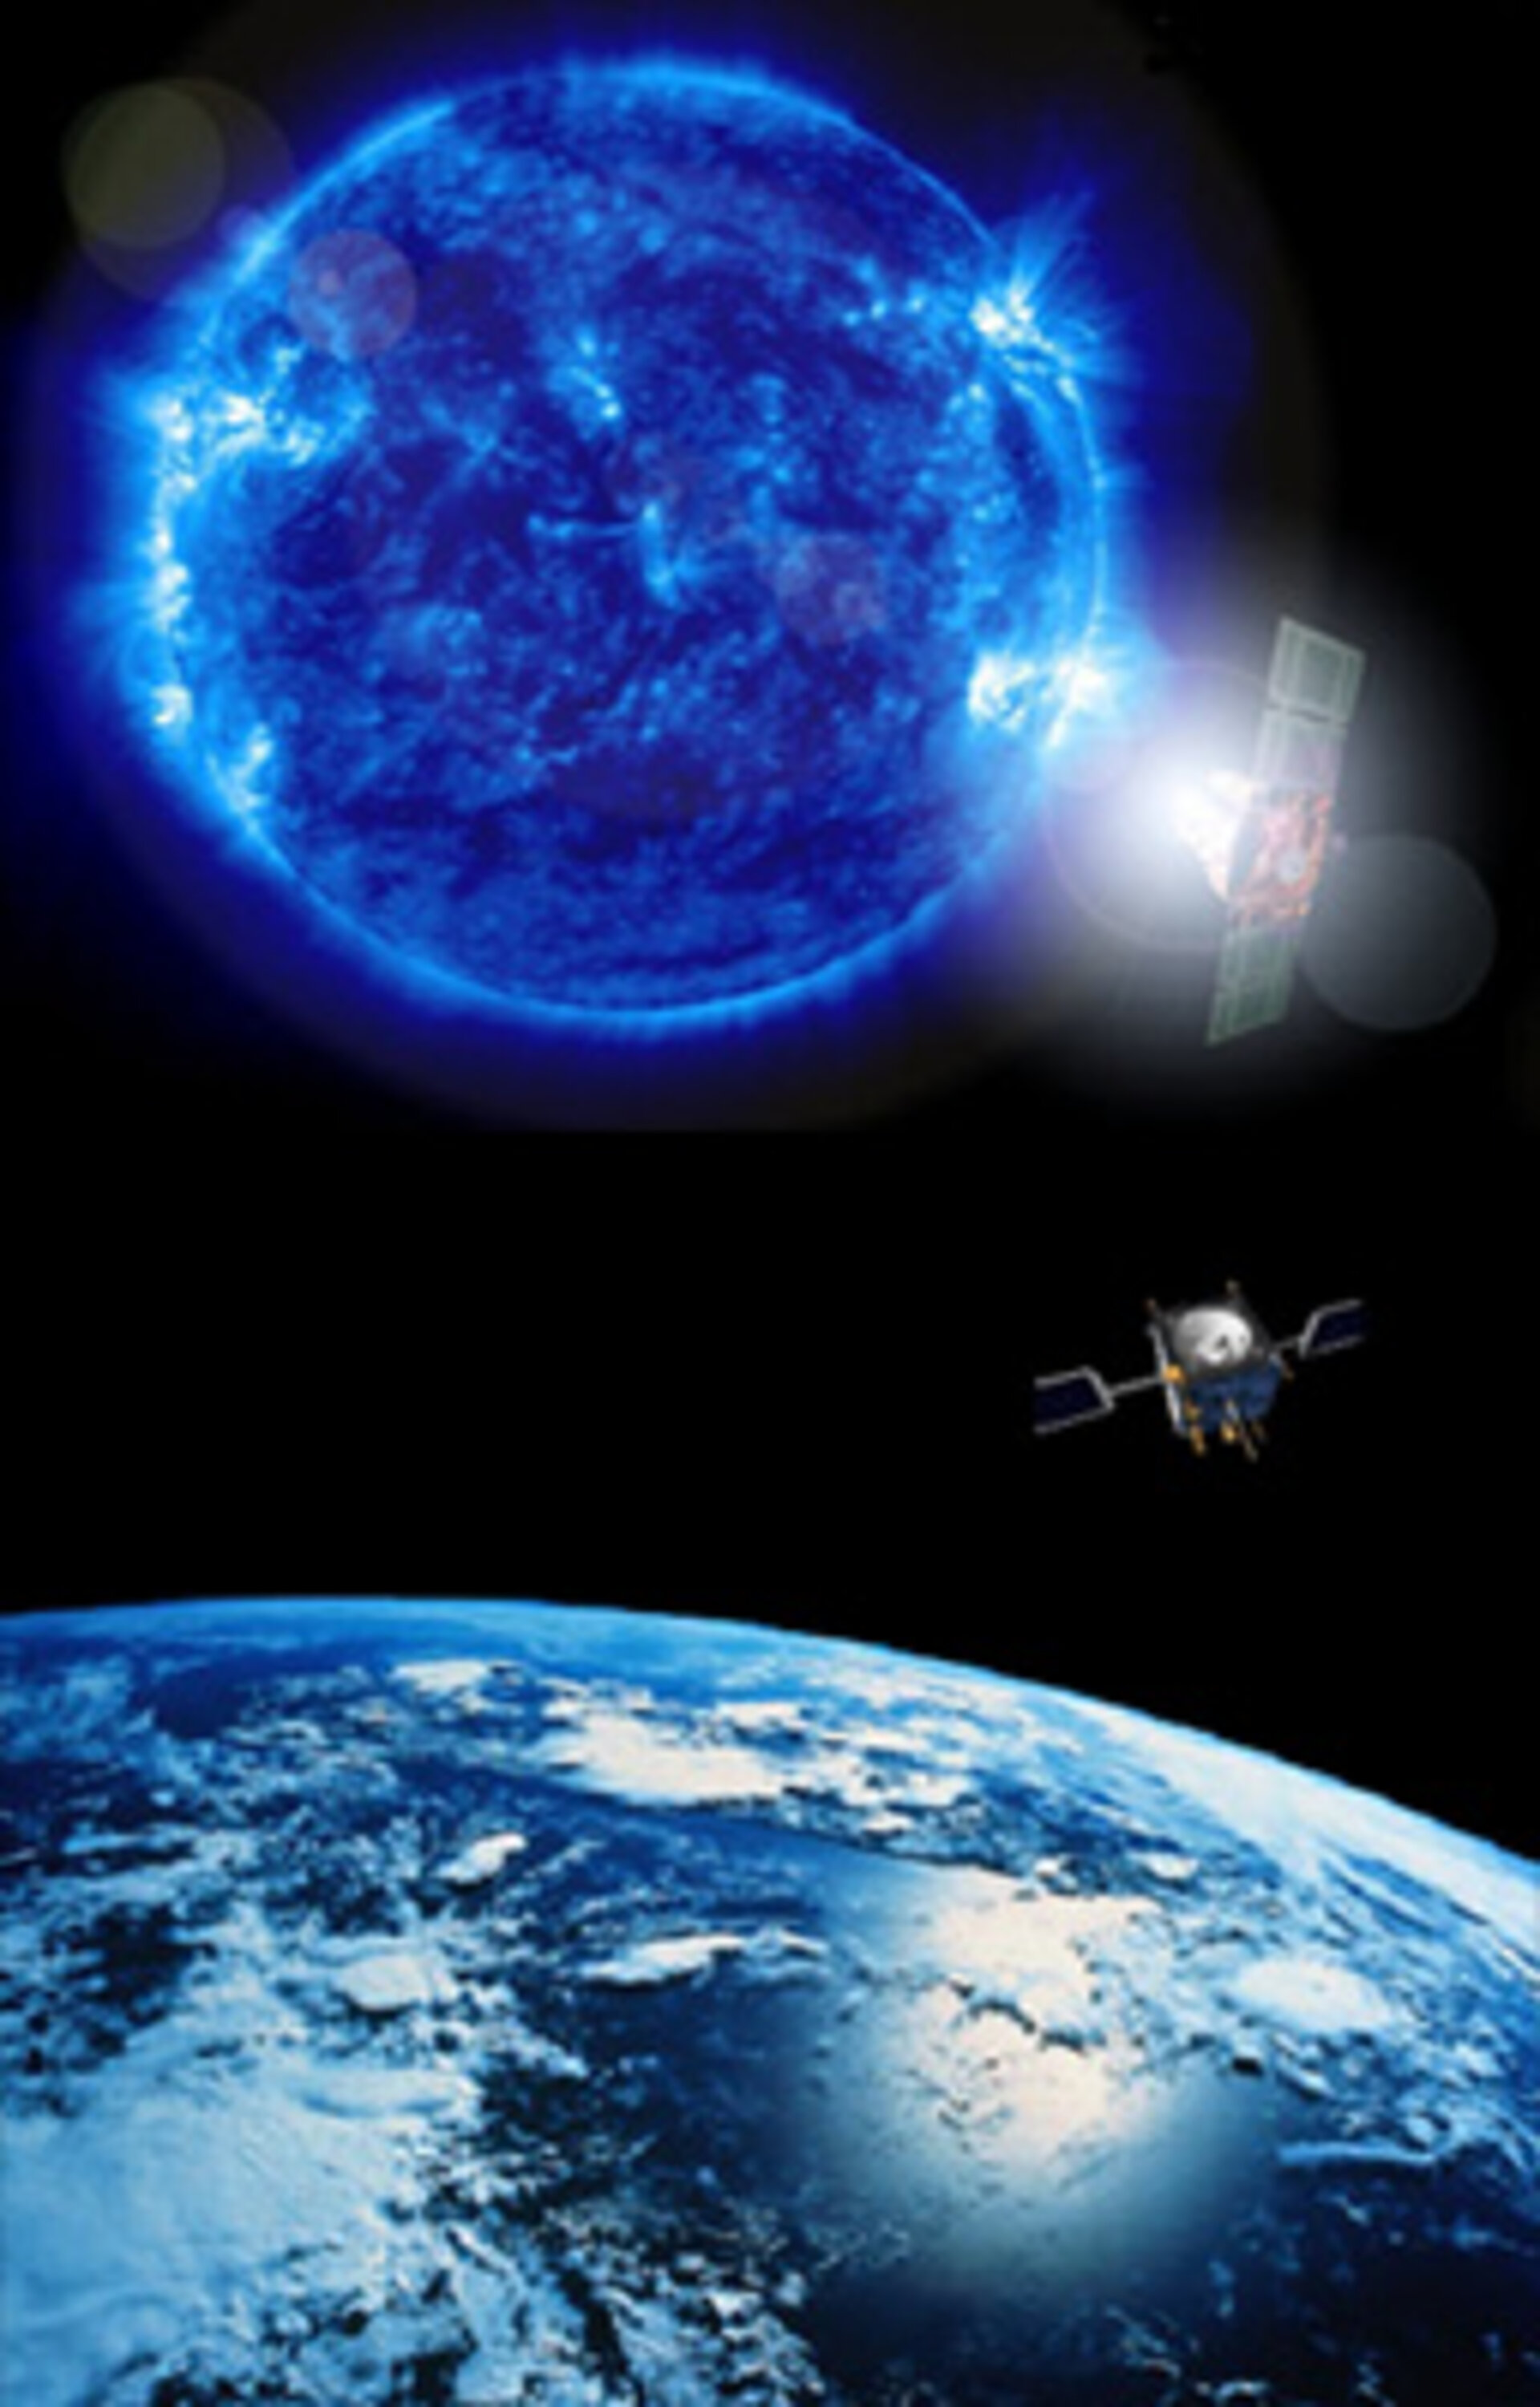 Space environment conditions are a complex set of phenomena involving the Sun and the Earth